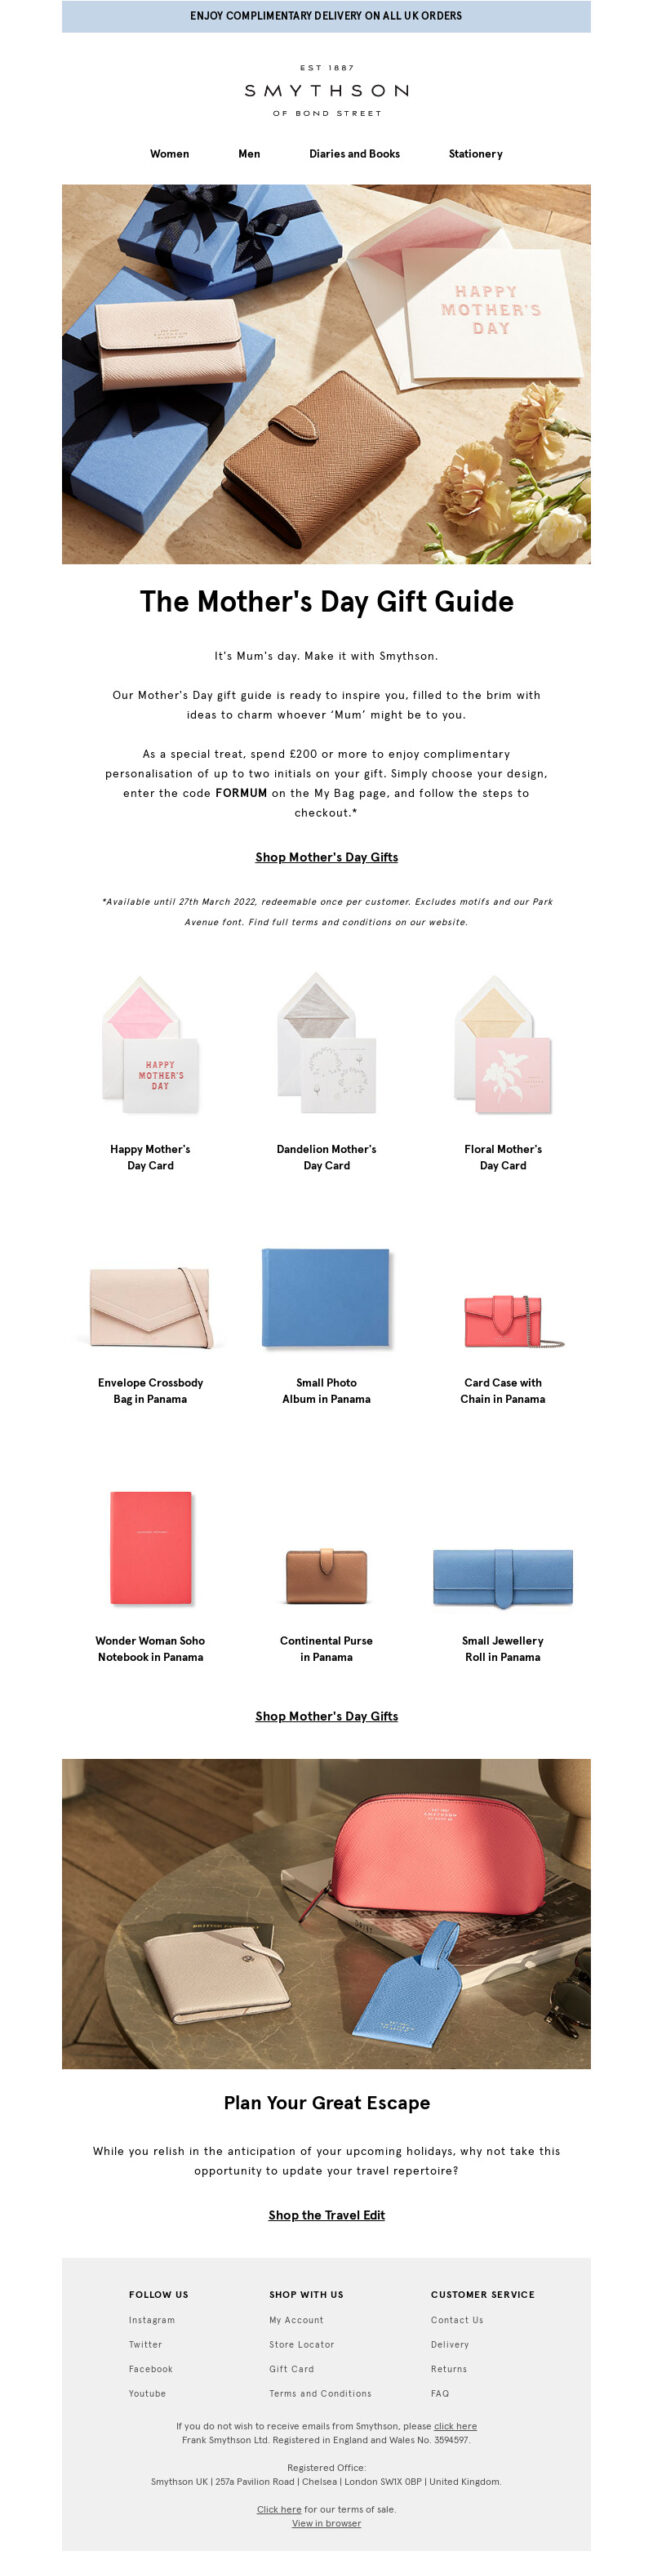 Smythson-Mother-s-Day-Gift-Guide